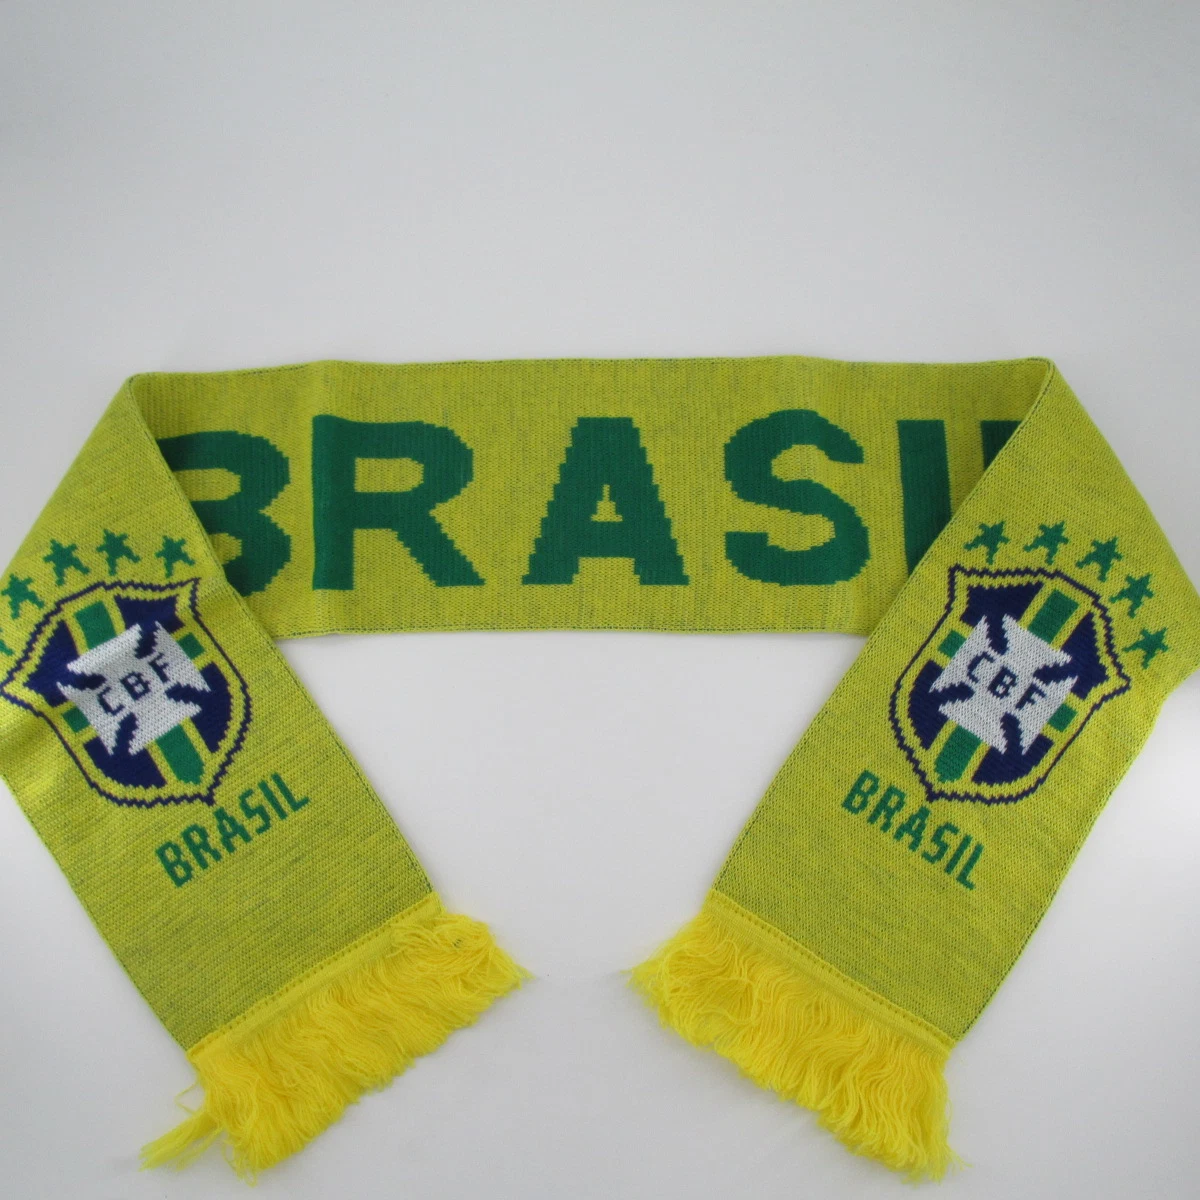 100% Acrylic Knitted Jacquard Football Fans Soccer Scarf with Football Team Logo and Design